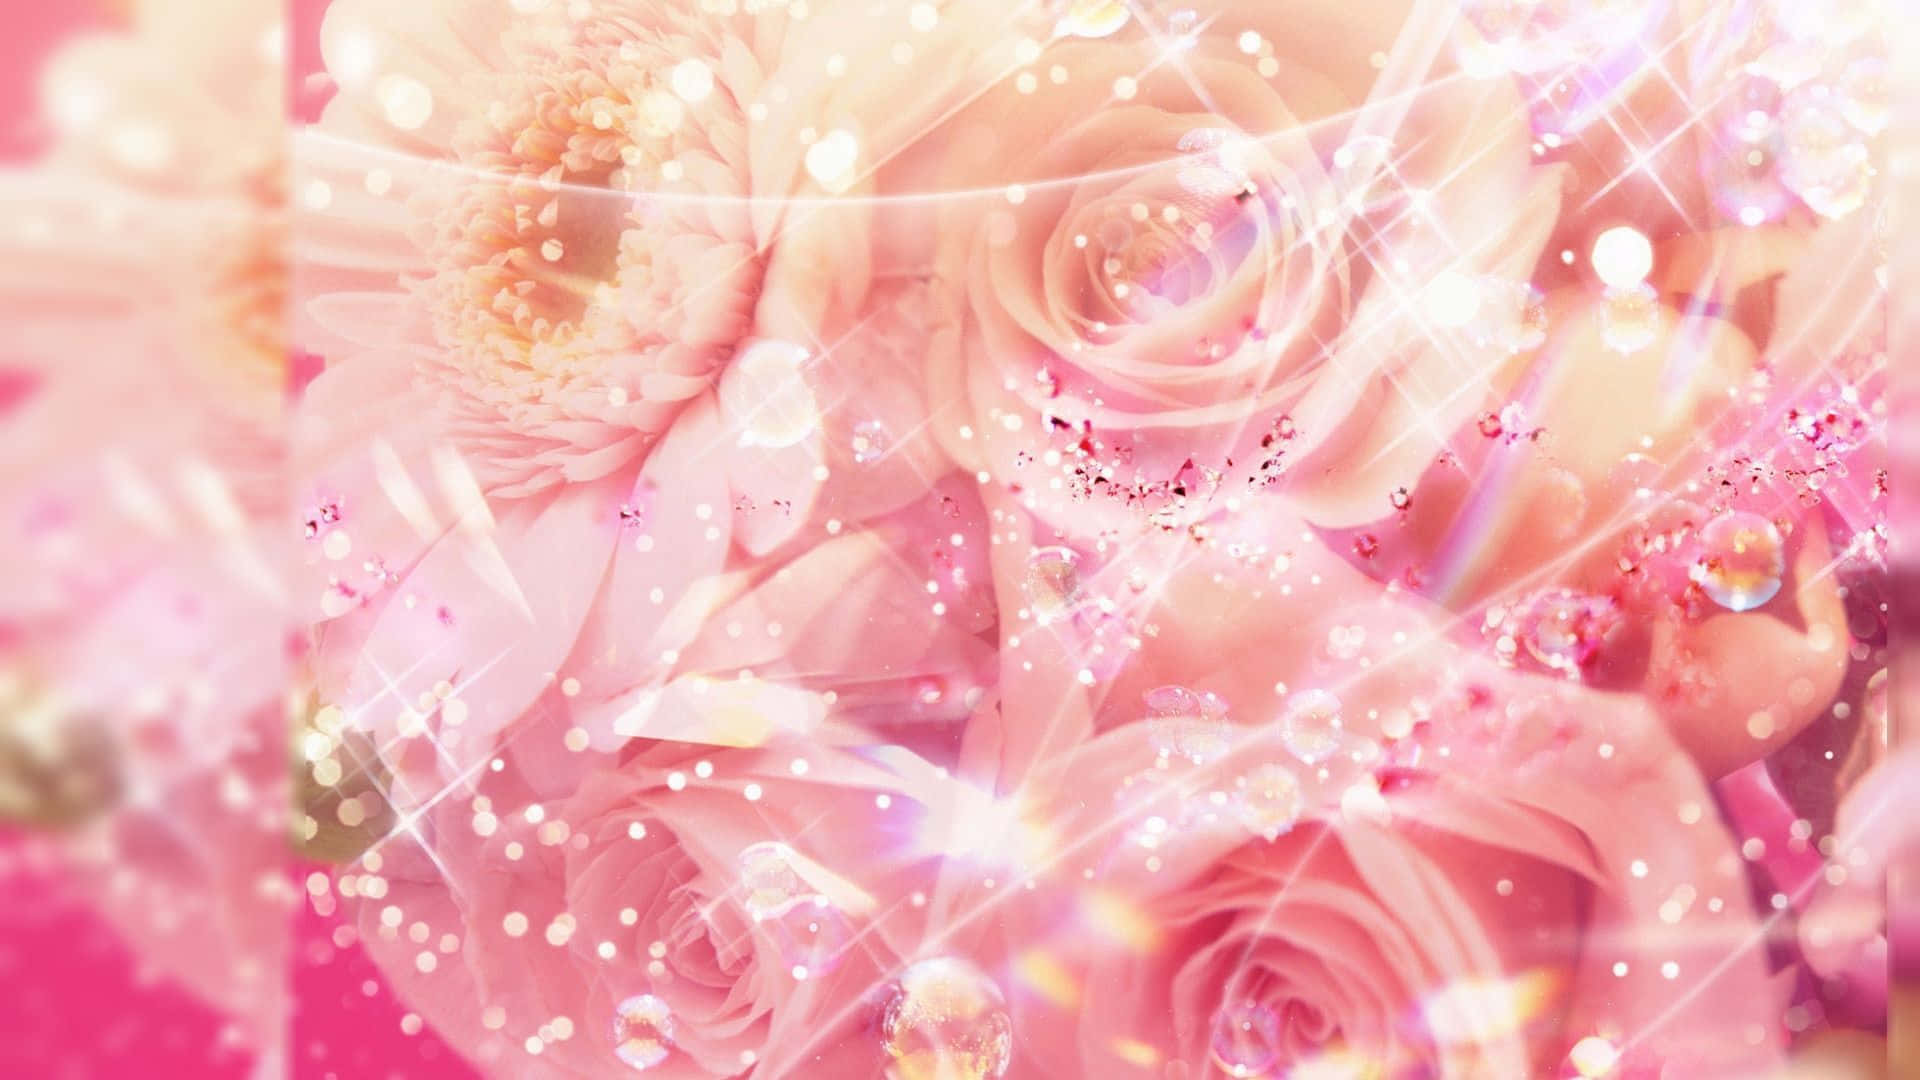 Pink Flowers With Sparkles On A Pink Background Wallpaper